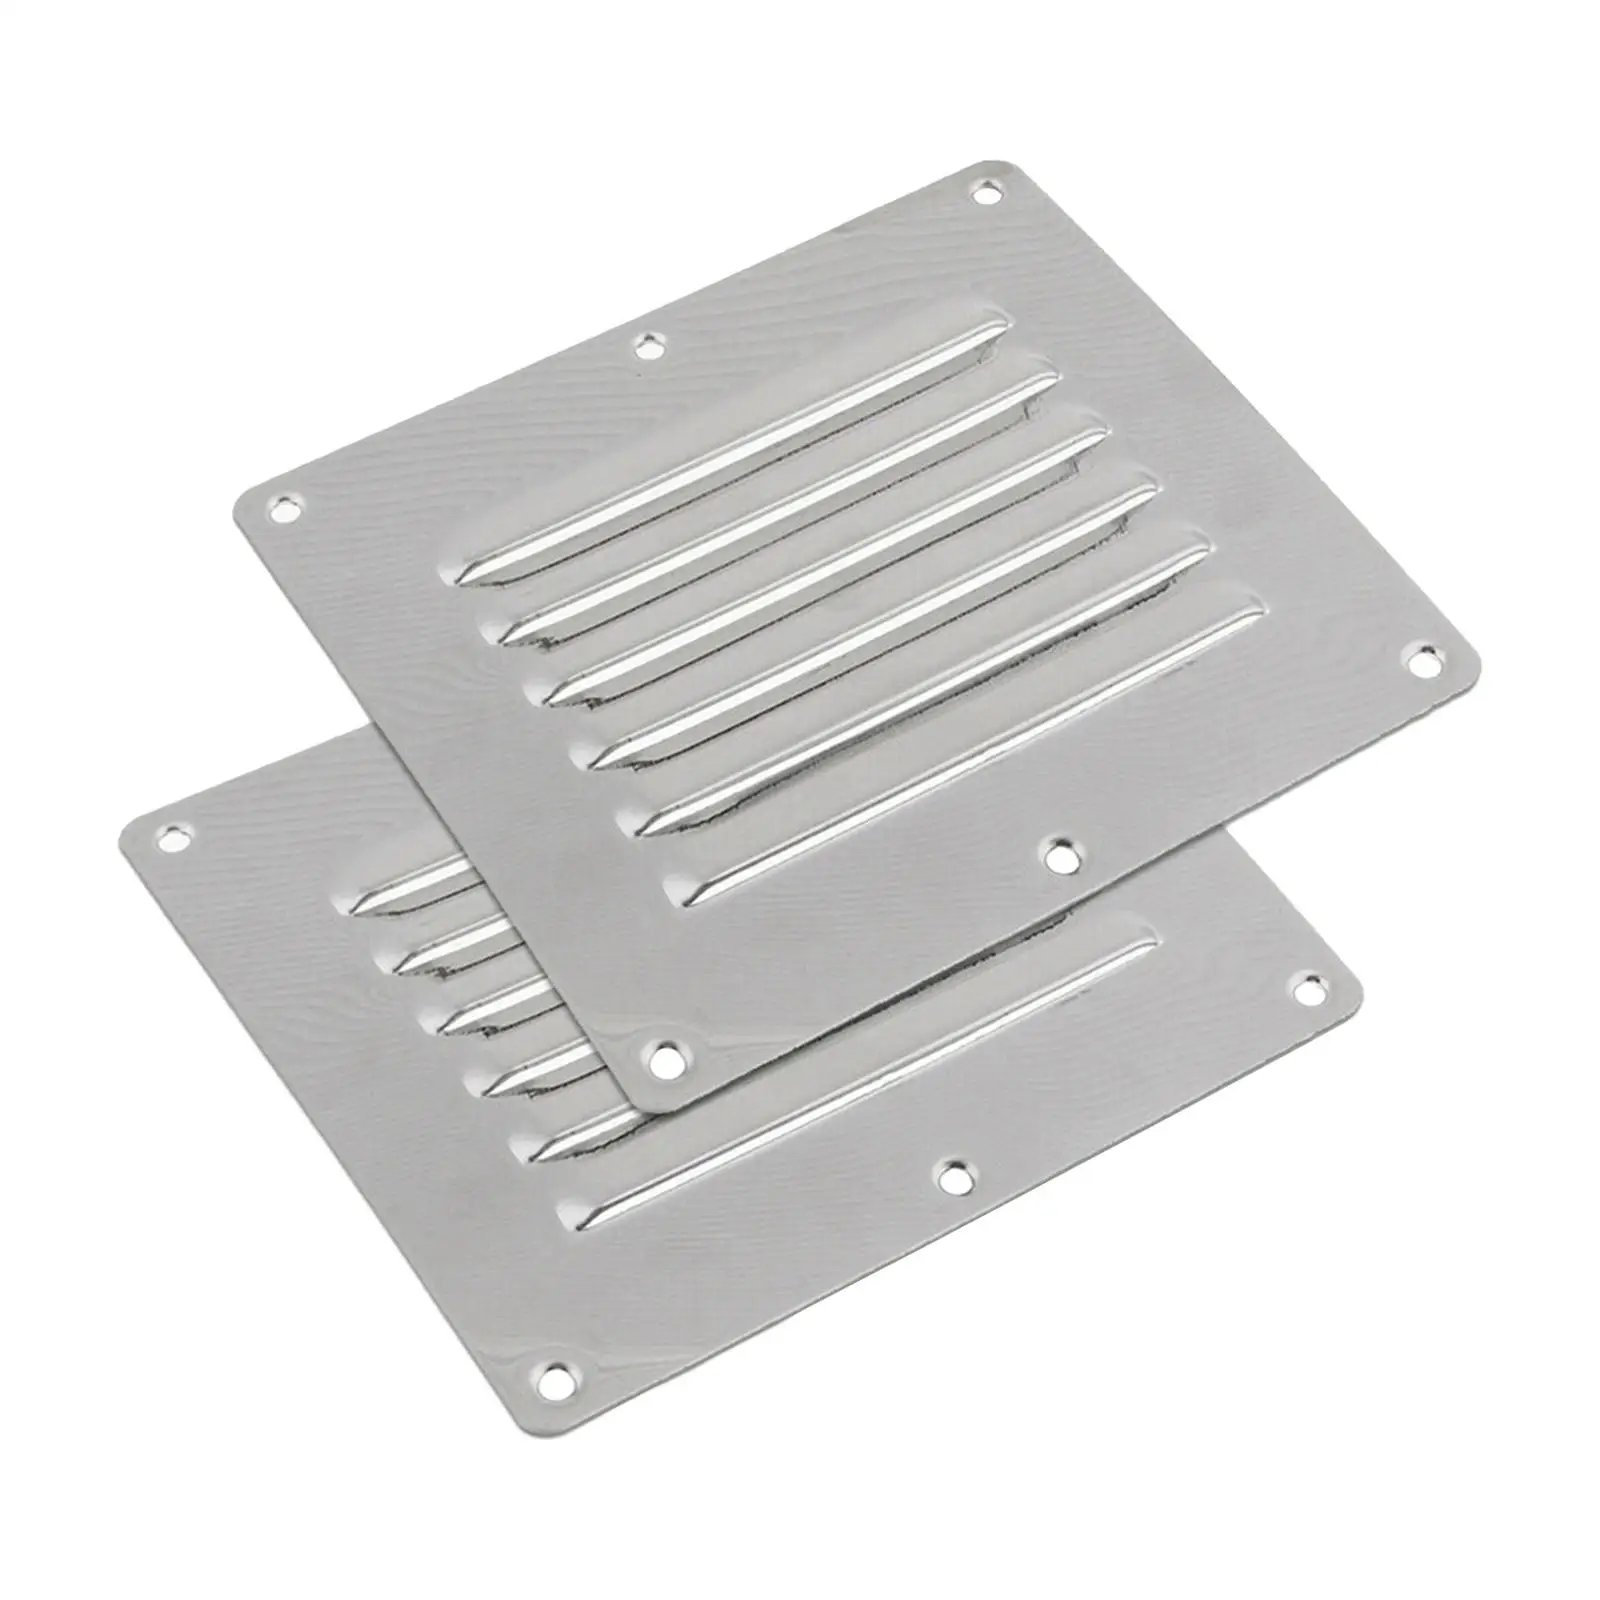 2x Vent Louver Grill 12.7x11.5cm Vent Hood Air Outlet Vents Air Ventilation Cover for Wall Sailing Boat Yacht Ceiling Sidewall